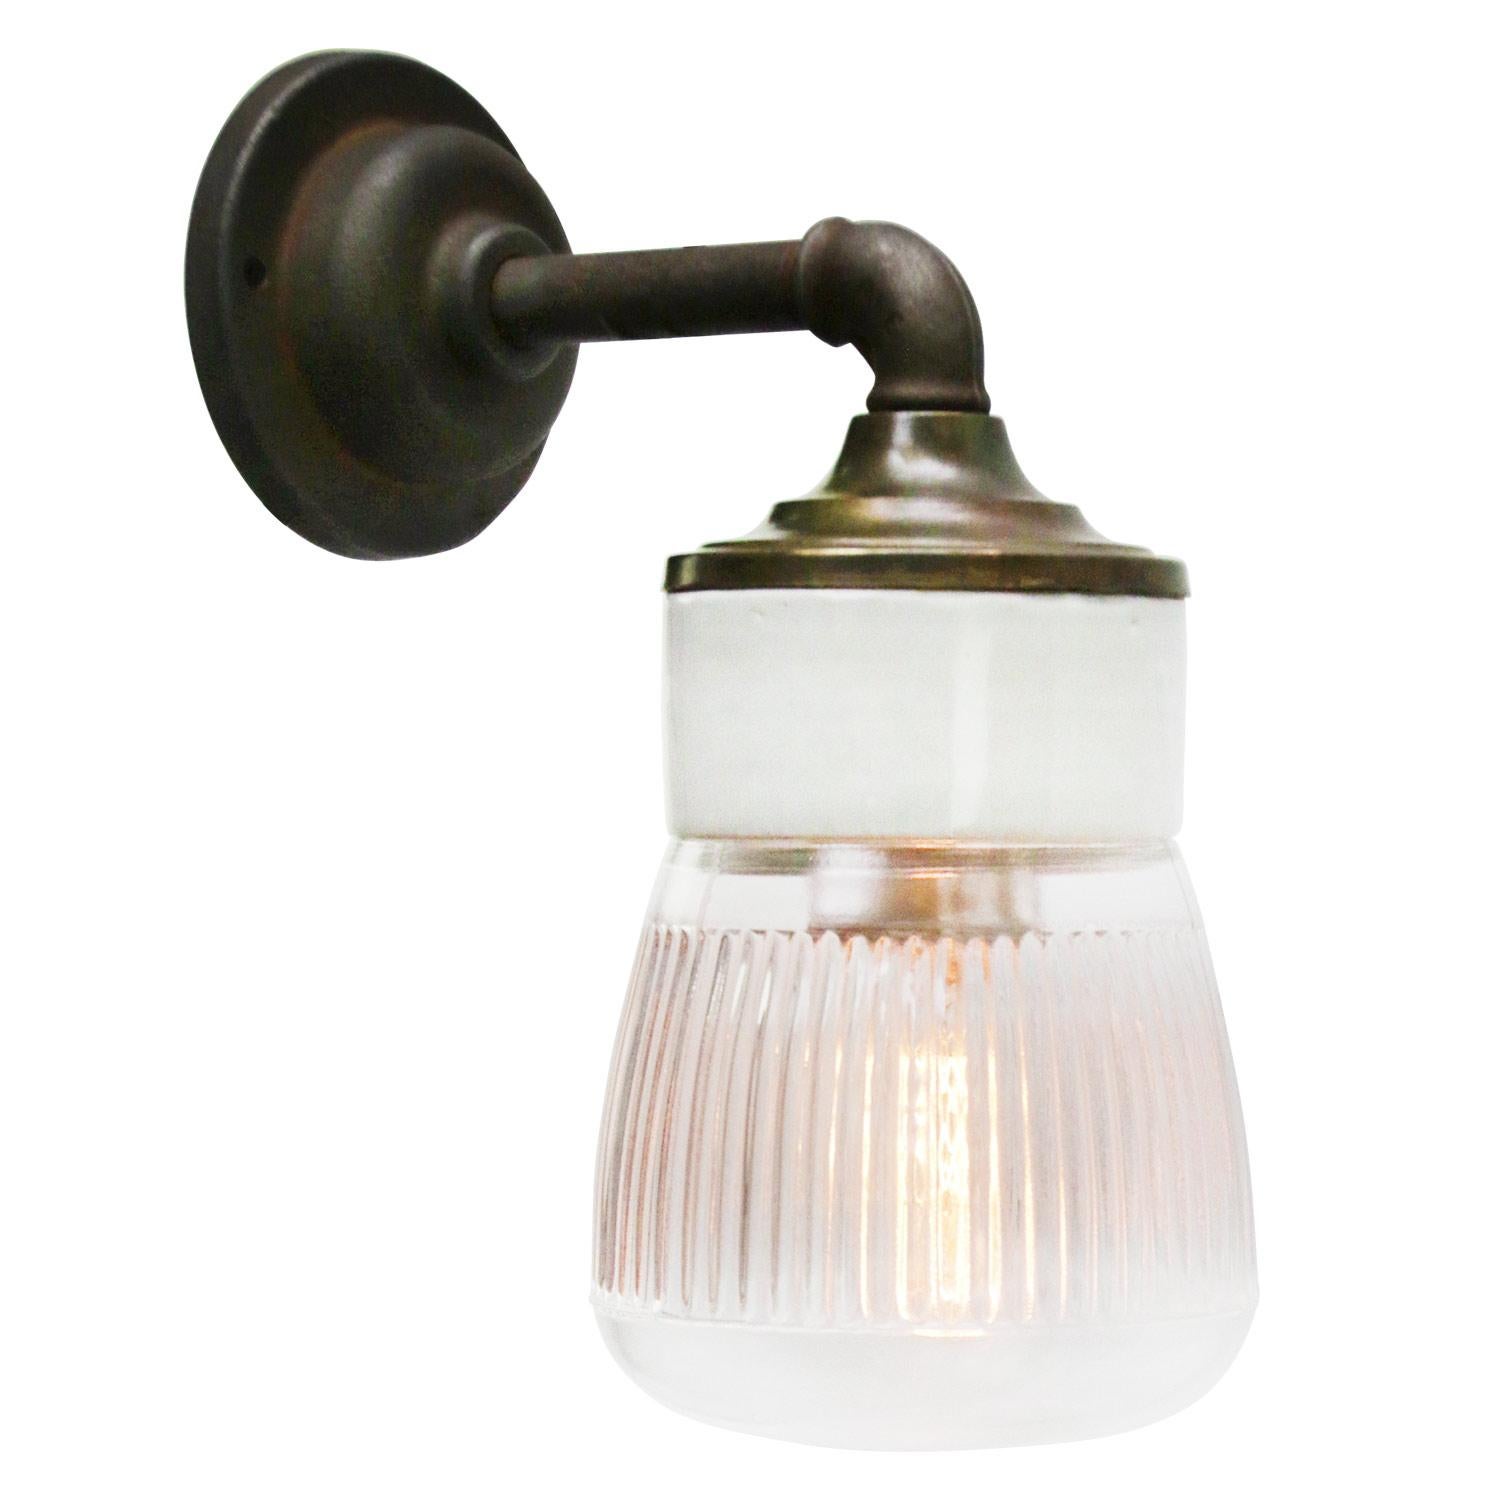 Porcelain industrial wall lamp.
White porcelain, brass and cast iron
Clear striped glass.
2 conductors, no ground.

Diameter wall mount 10.5 cm / 4”.
2 holes to secure.

For use inside only

Weight: 2.20 kg / 4.9 lb

Priced per individual item. All